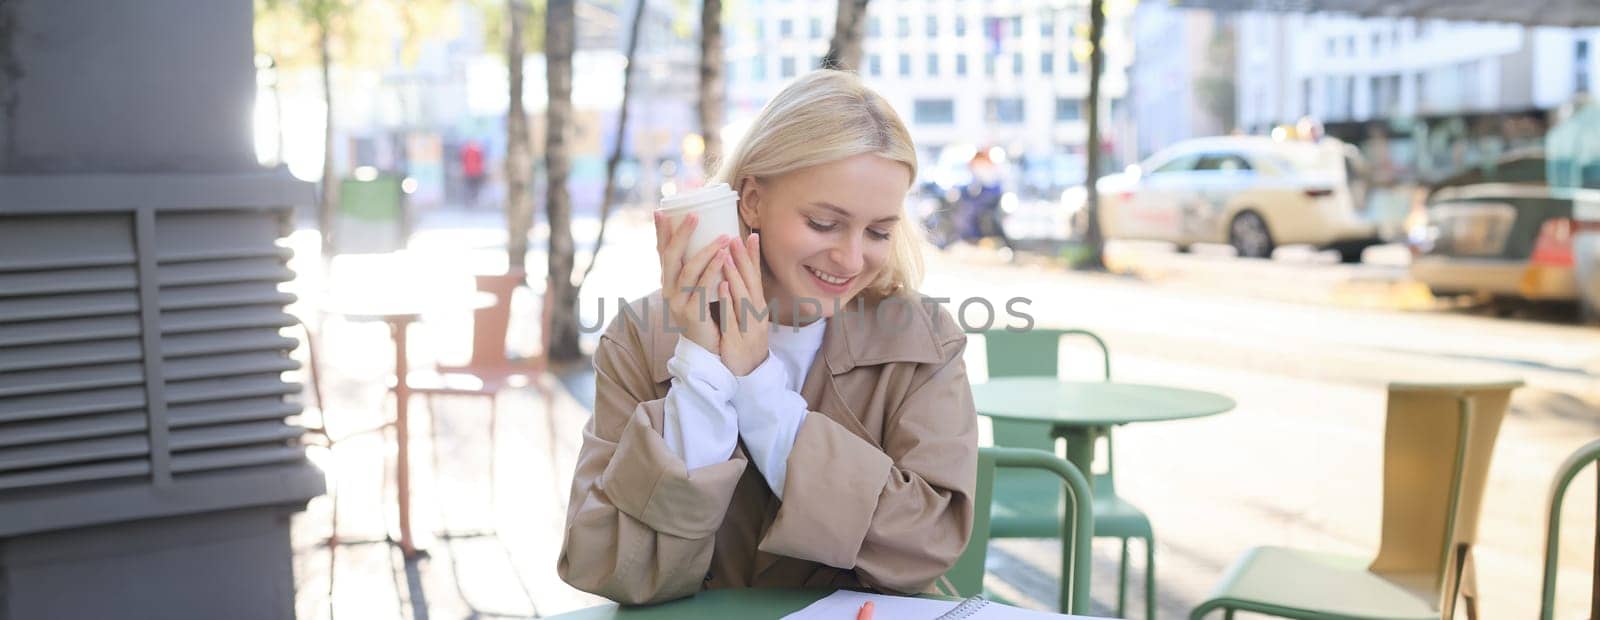 Beautiful blond girl doing homework in street cafe, holding takeaway cup, drinking coffee, spending time outdoors in city centre.